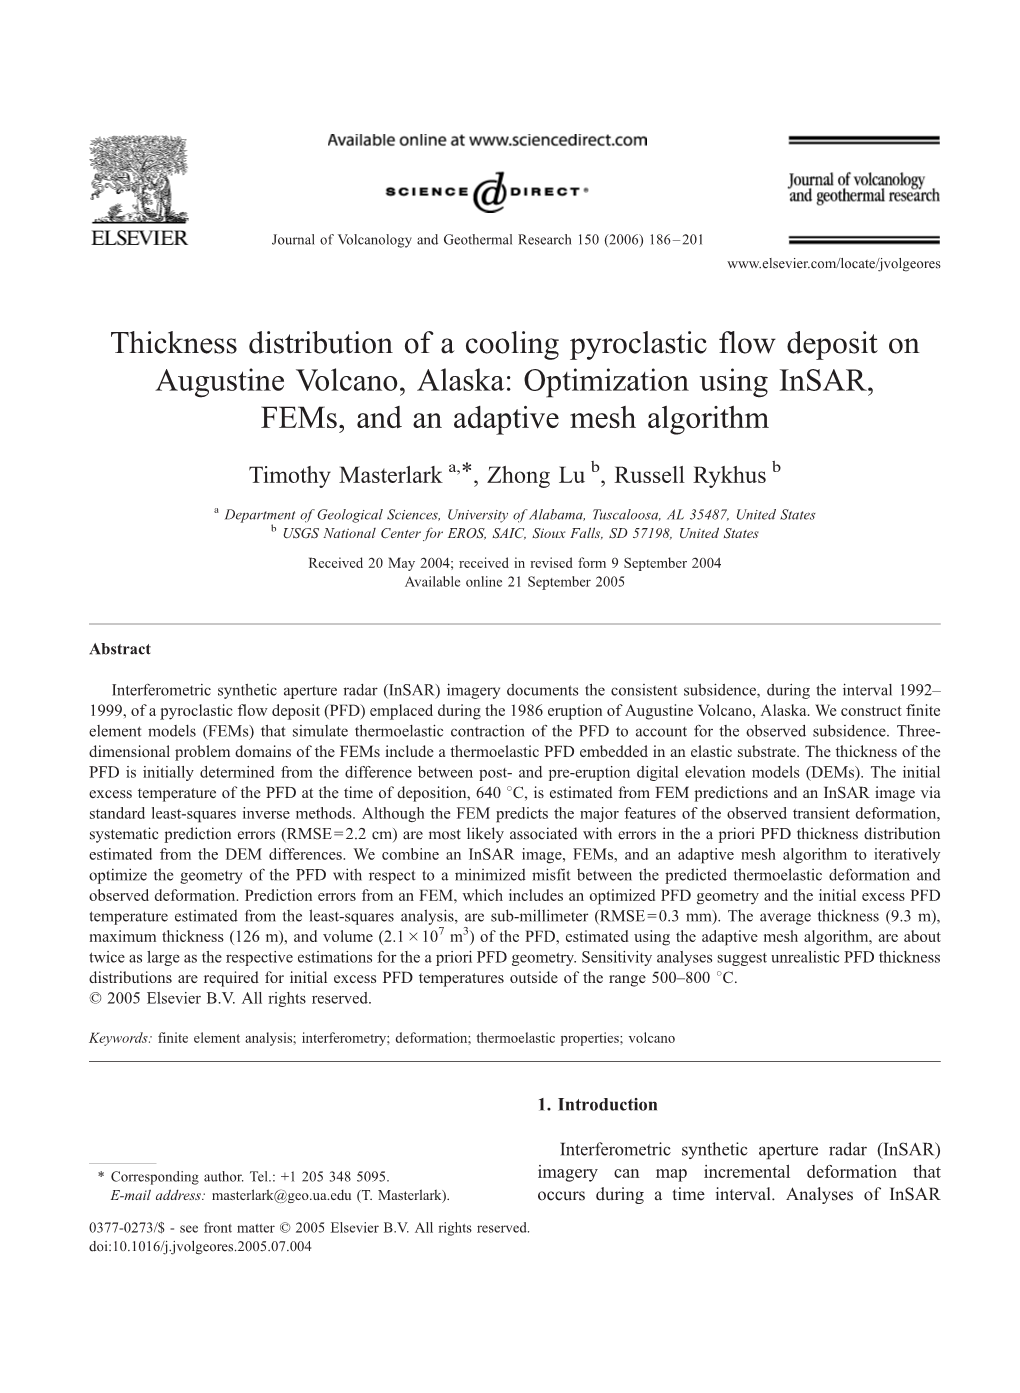 Thickness Distribution of a Cooling Pyroclastic Flow Deposit on Augustine Volcano, Alaska: Optimization Using Insar, Fems, and an Adaptive Mesh Algorithm